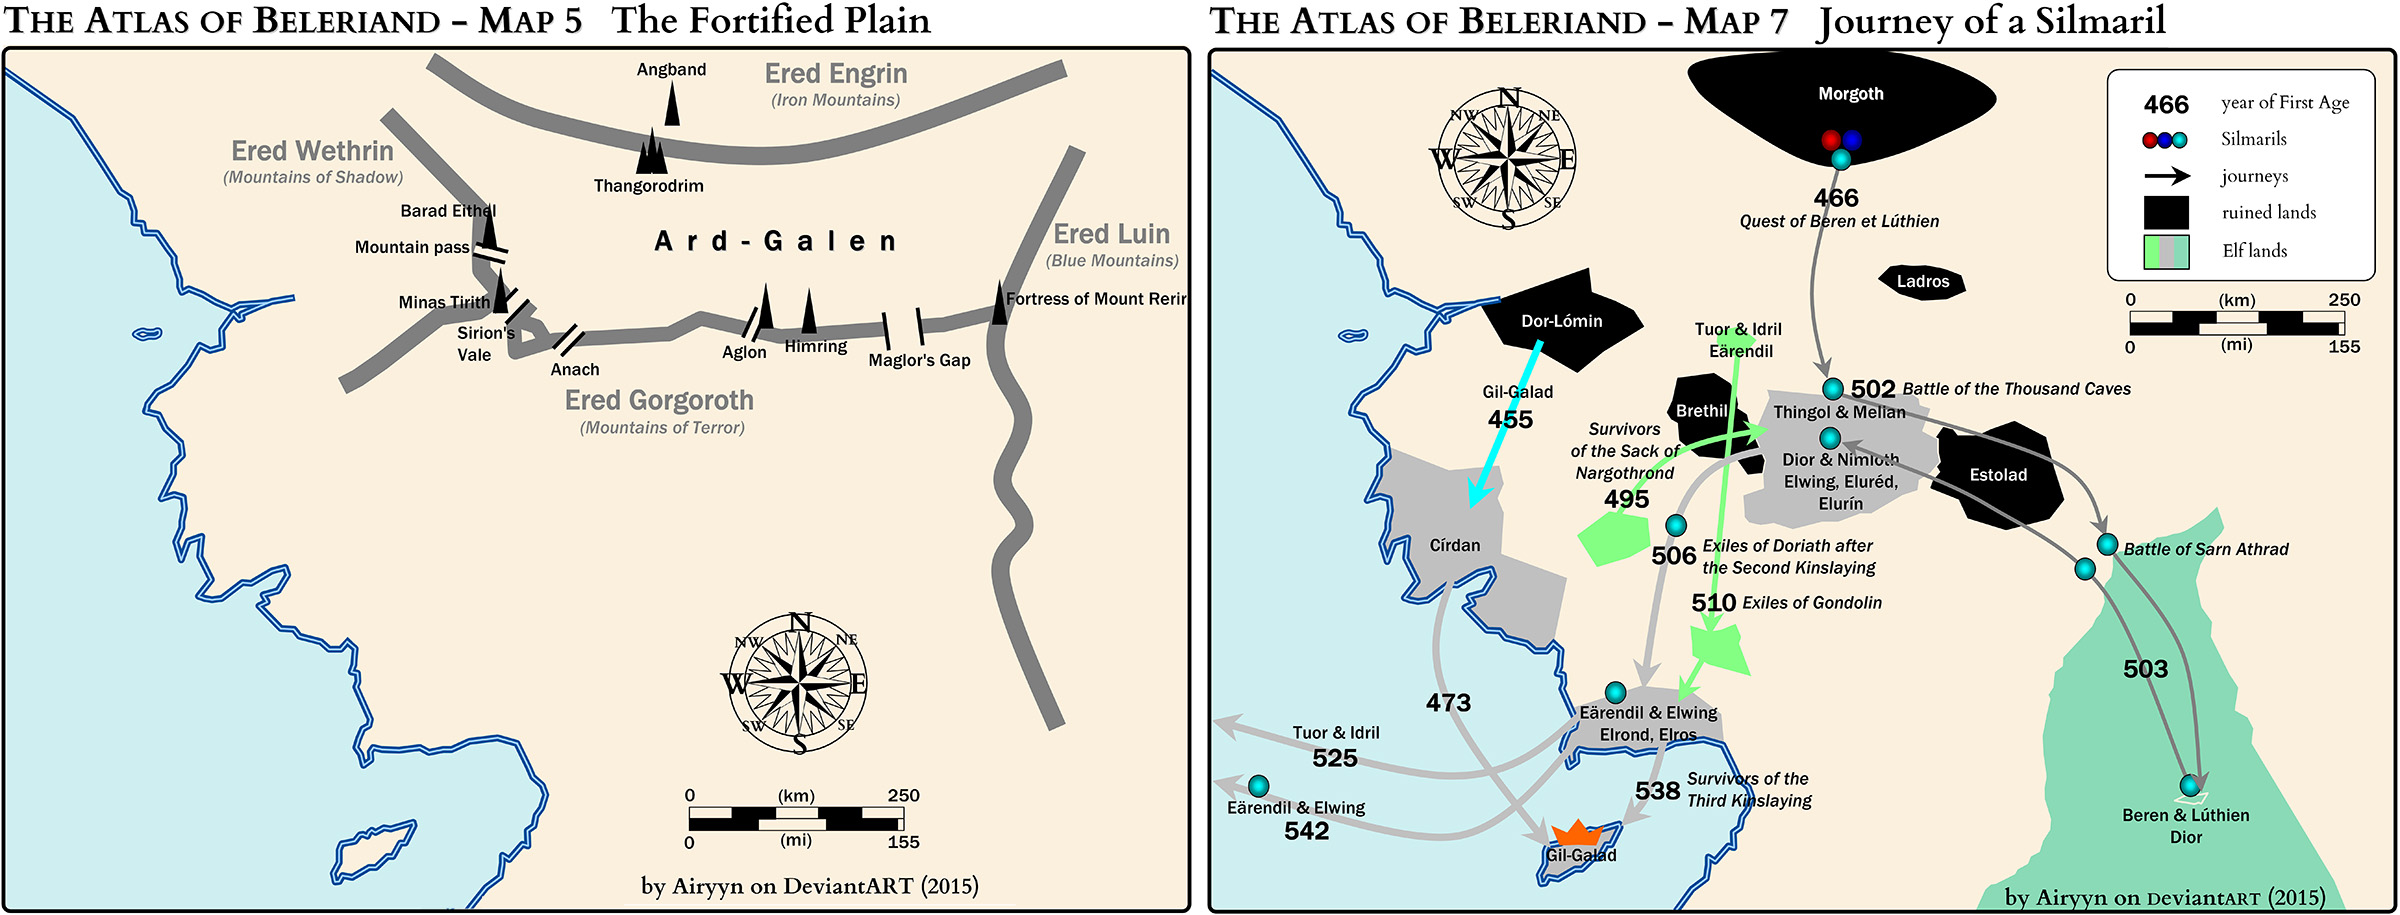 The Atlas of Beleriand — Map 5 and & by Airynn